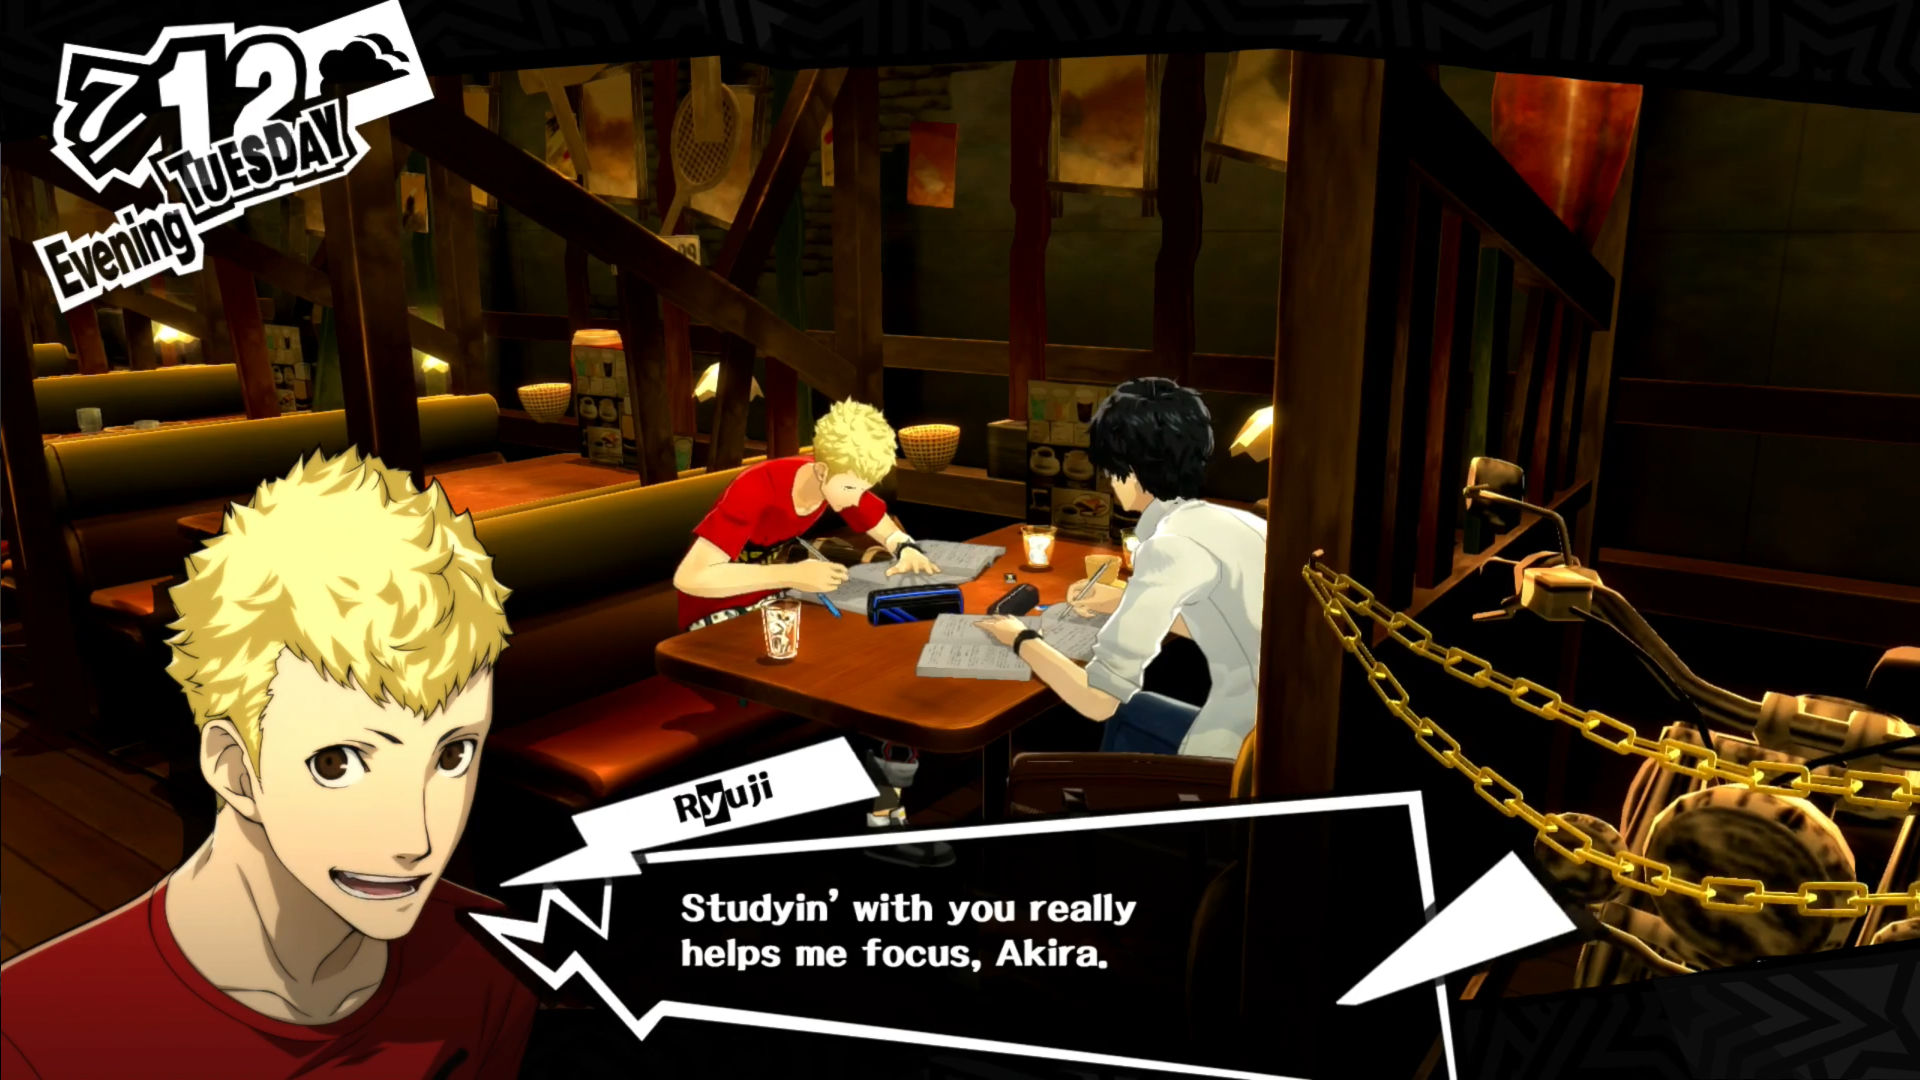 Persona 5 answers; Ryuji studying with the protagonist